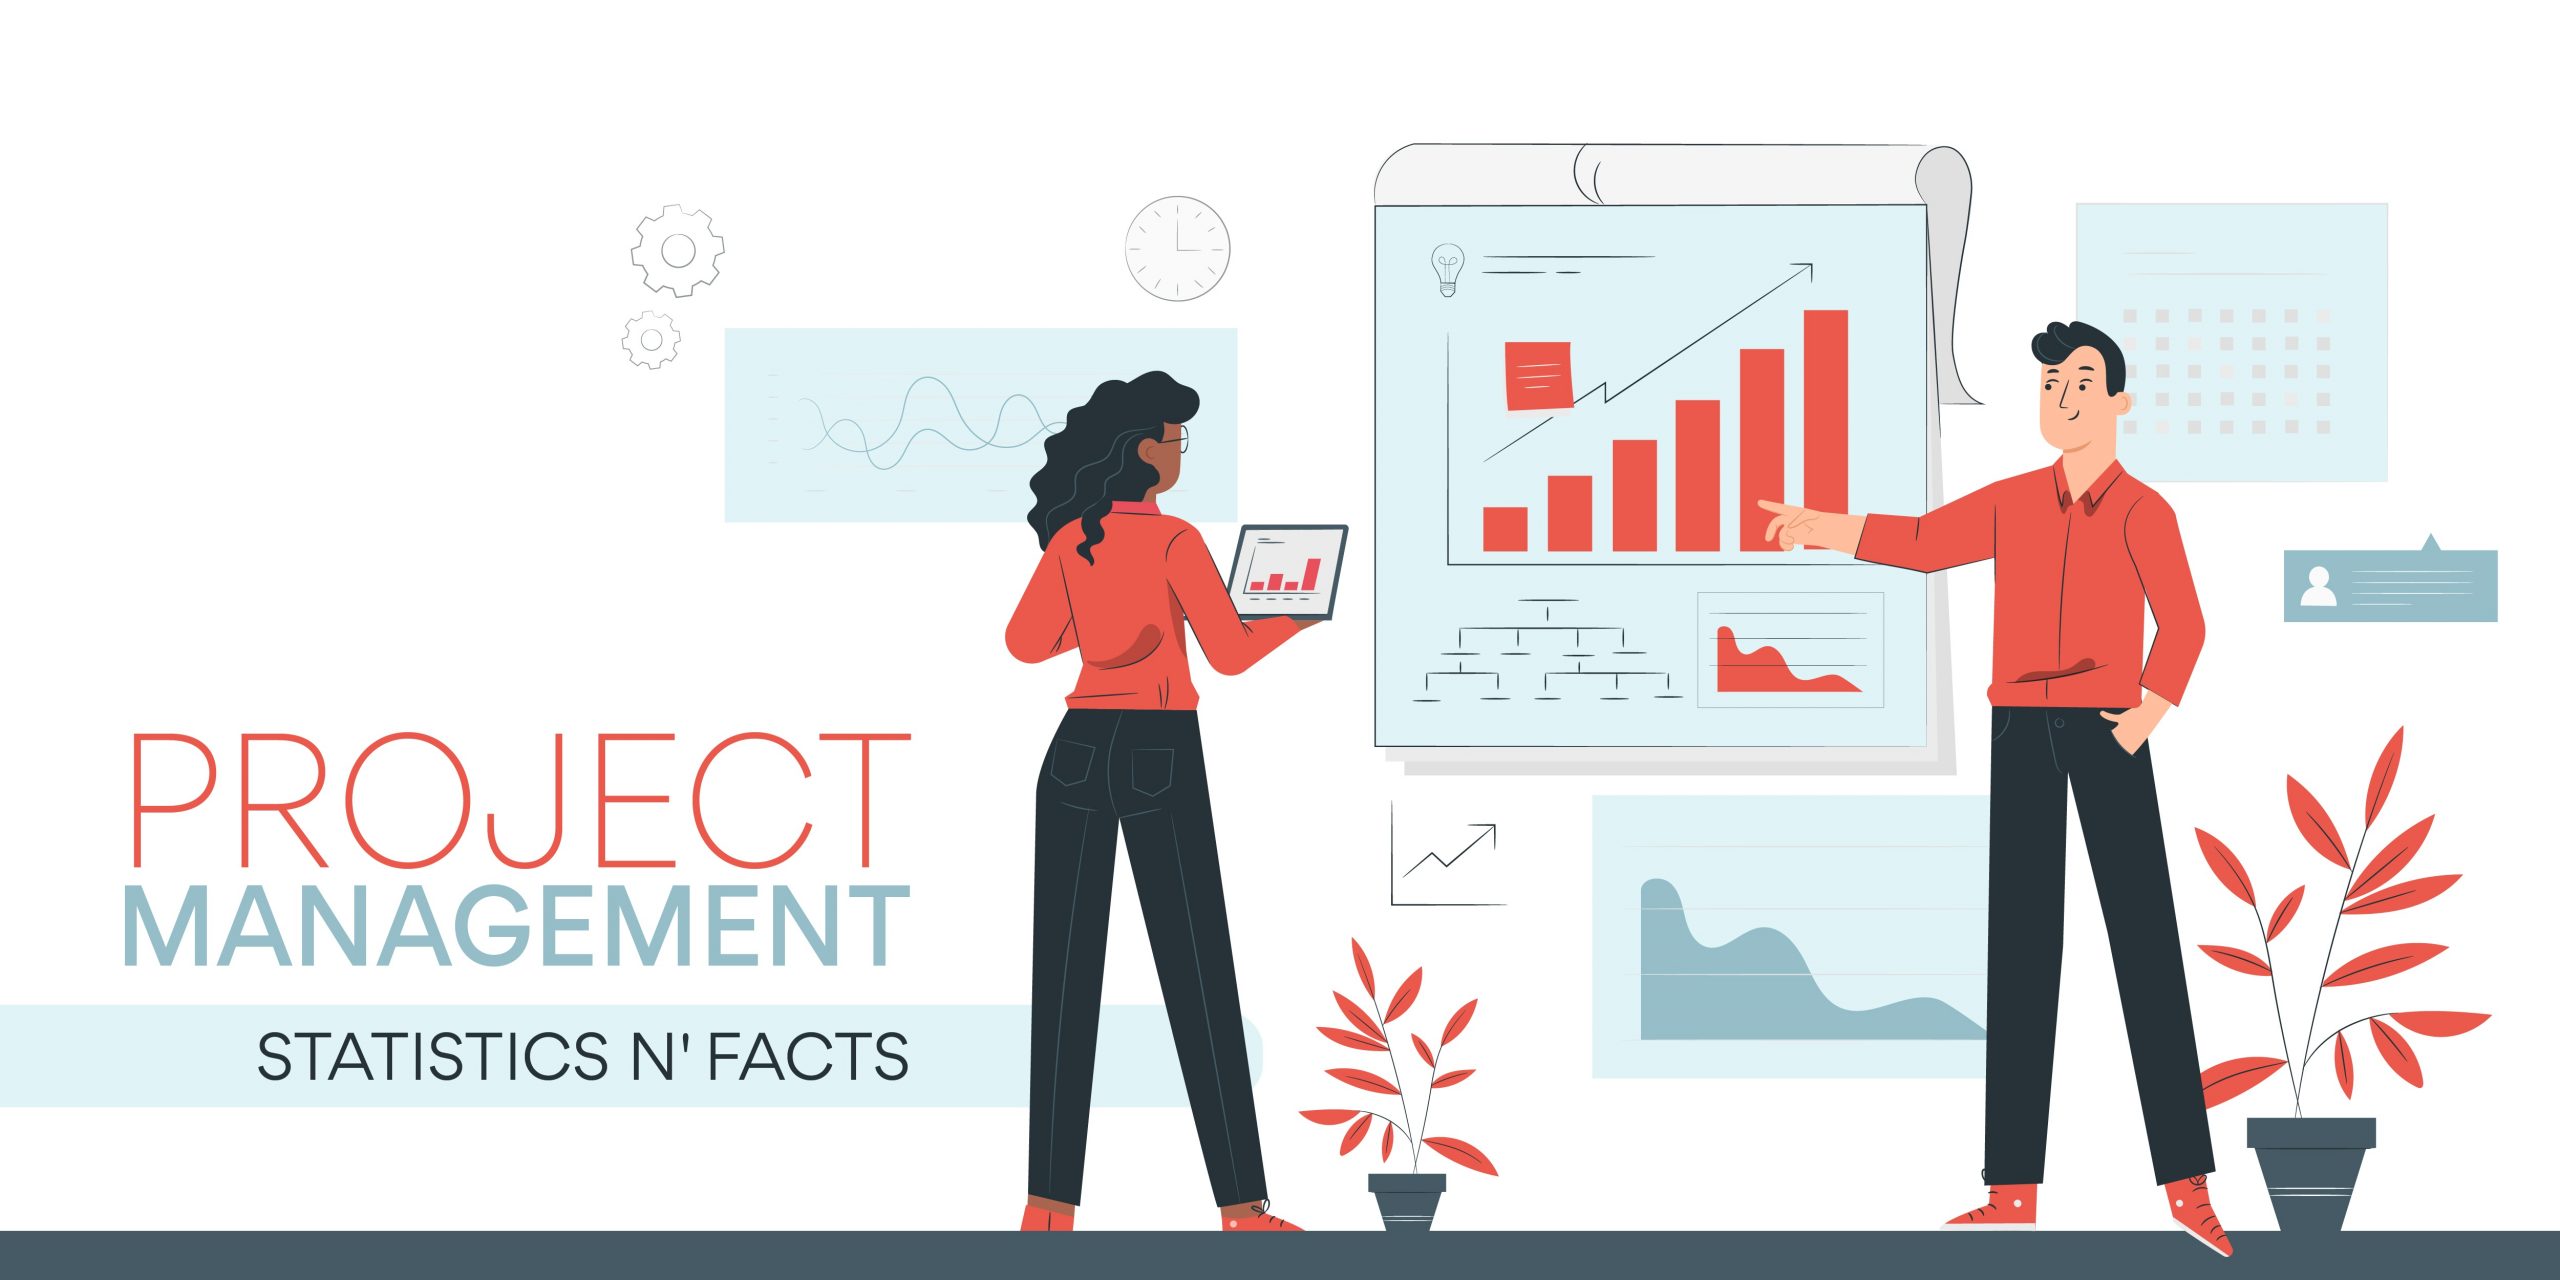 Project Management Statistics – By Causes of Project Failures, Software Features, KPIs of Projects, Demographics, Education Qualifications, Gender Pay Gap, Job Tenure